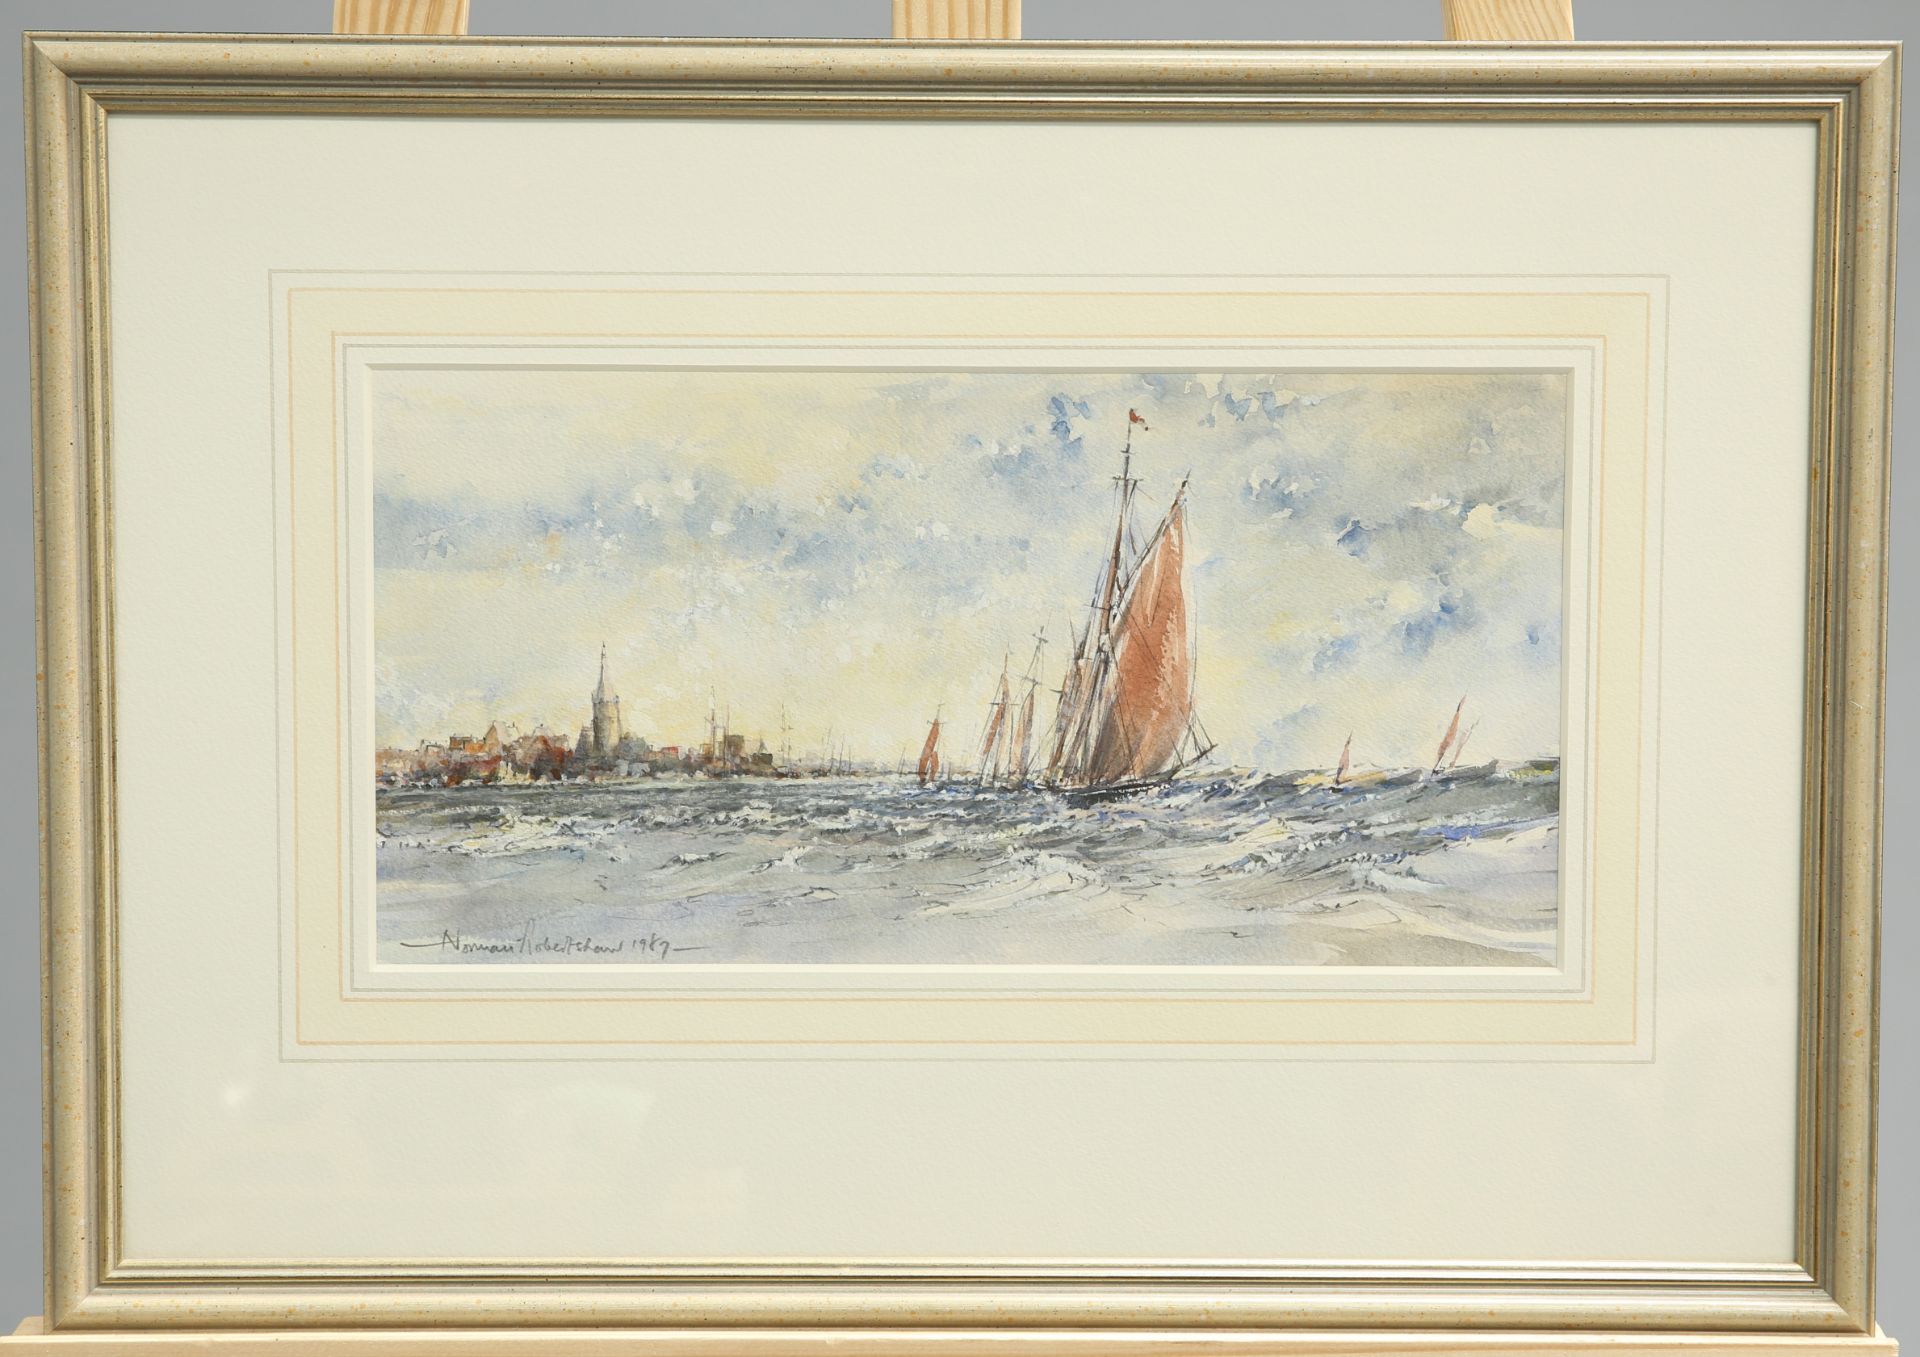 NORMAN ROBERTSHAW (20TH CENTURY), SAILING SHIPS, signed and dated 1987 lower left, watercolour,